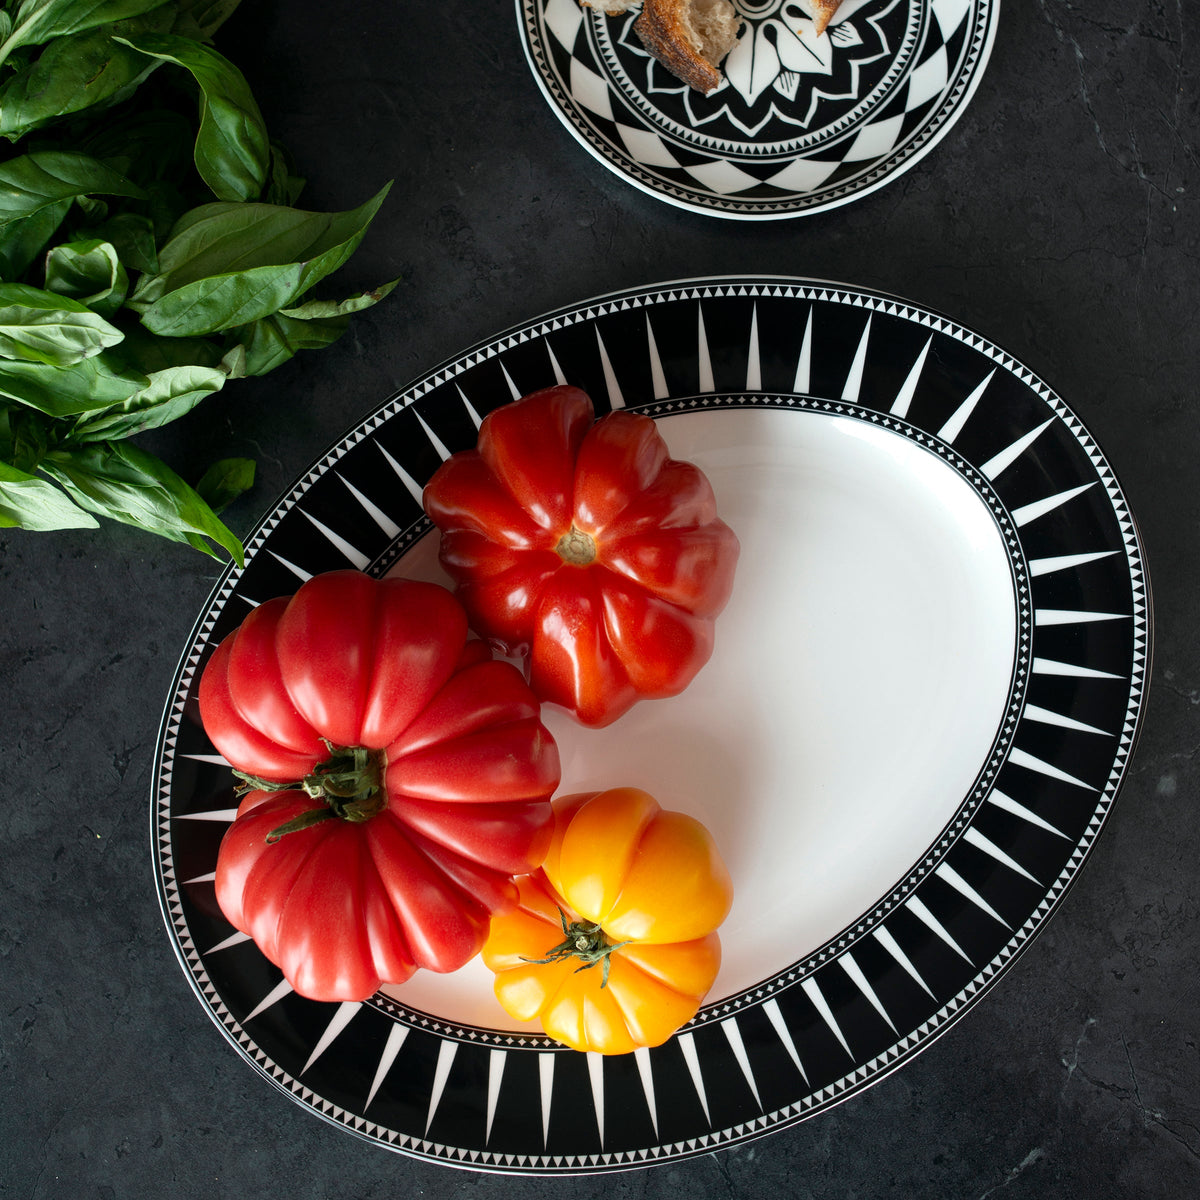 An elegant Marrakech Large Oval Rimmed Platter with tomatoes and basil from Caskata Artisanal Home.